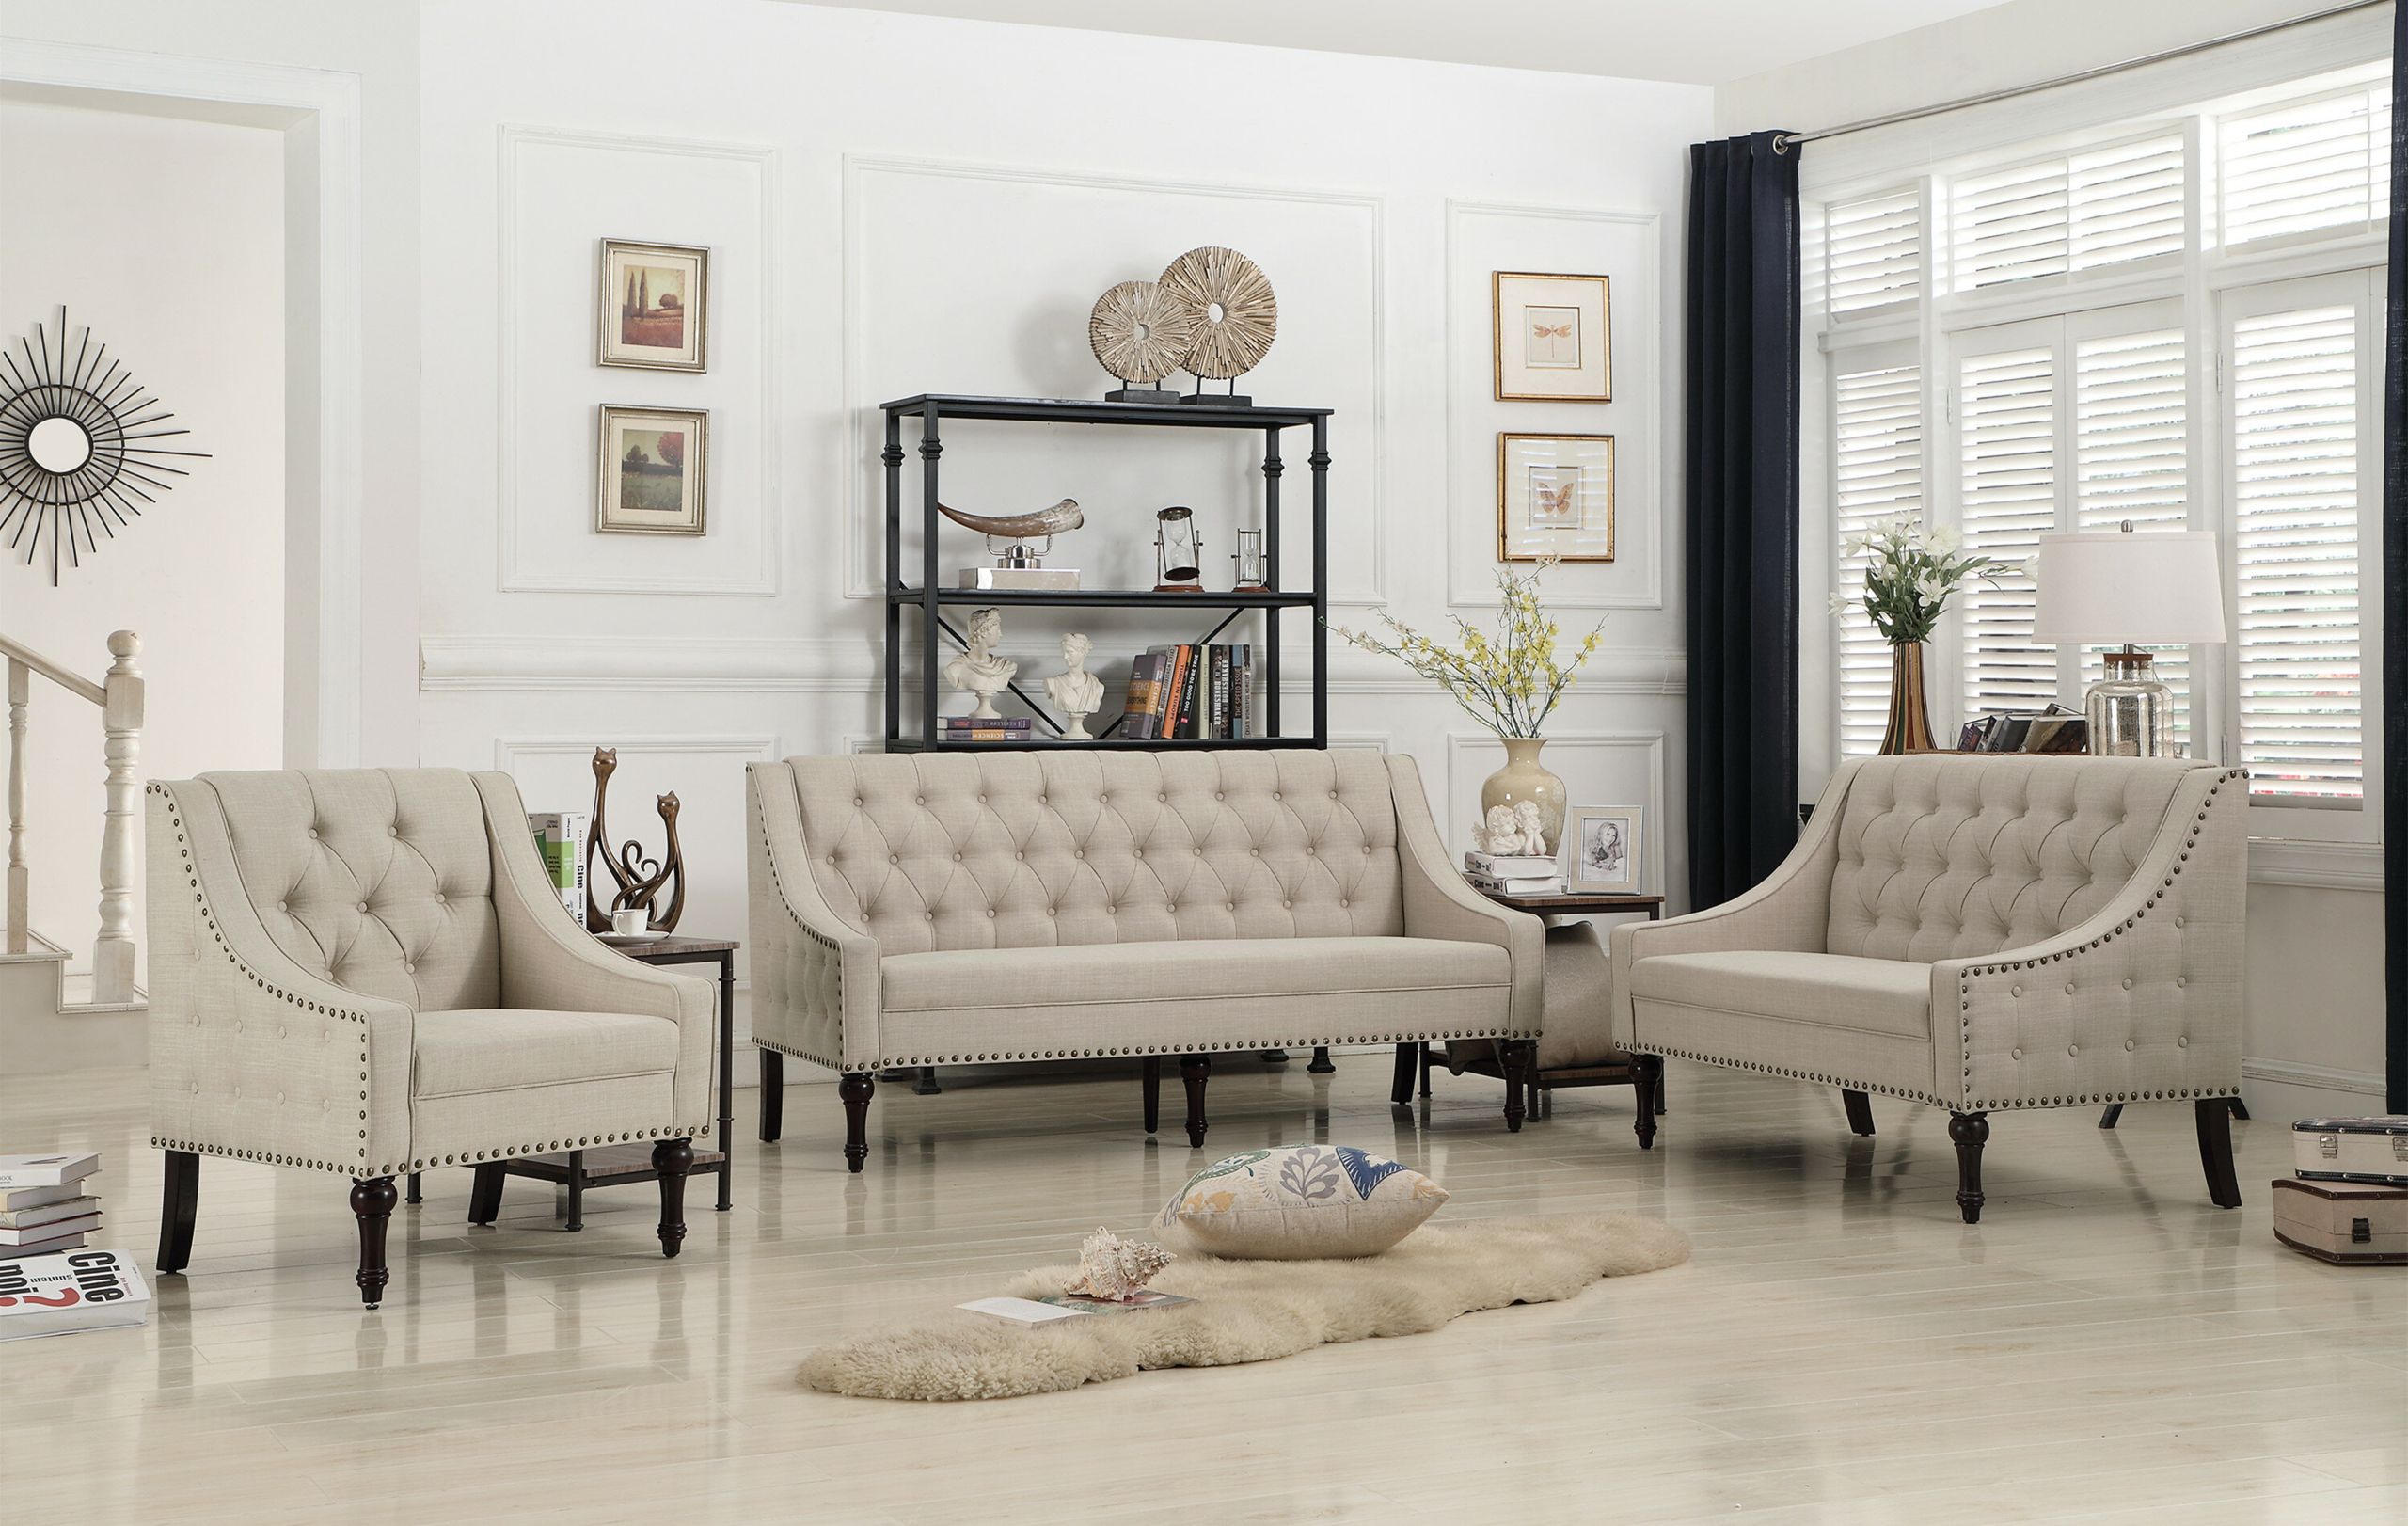 3 Piece Living Room Set You Ll Love In, Three Piece Living Room Set